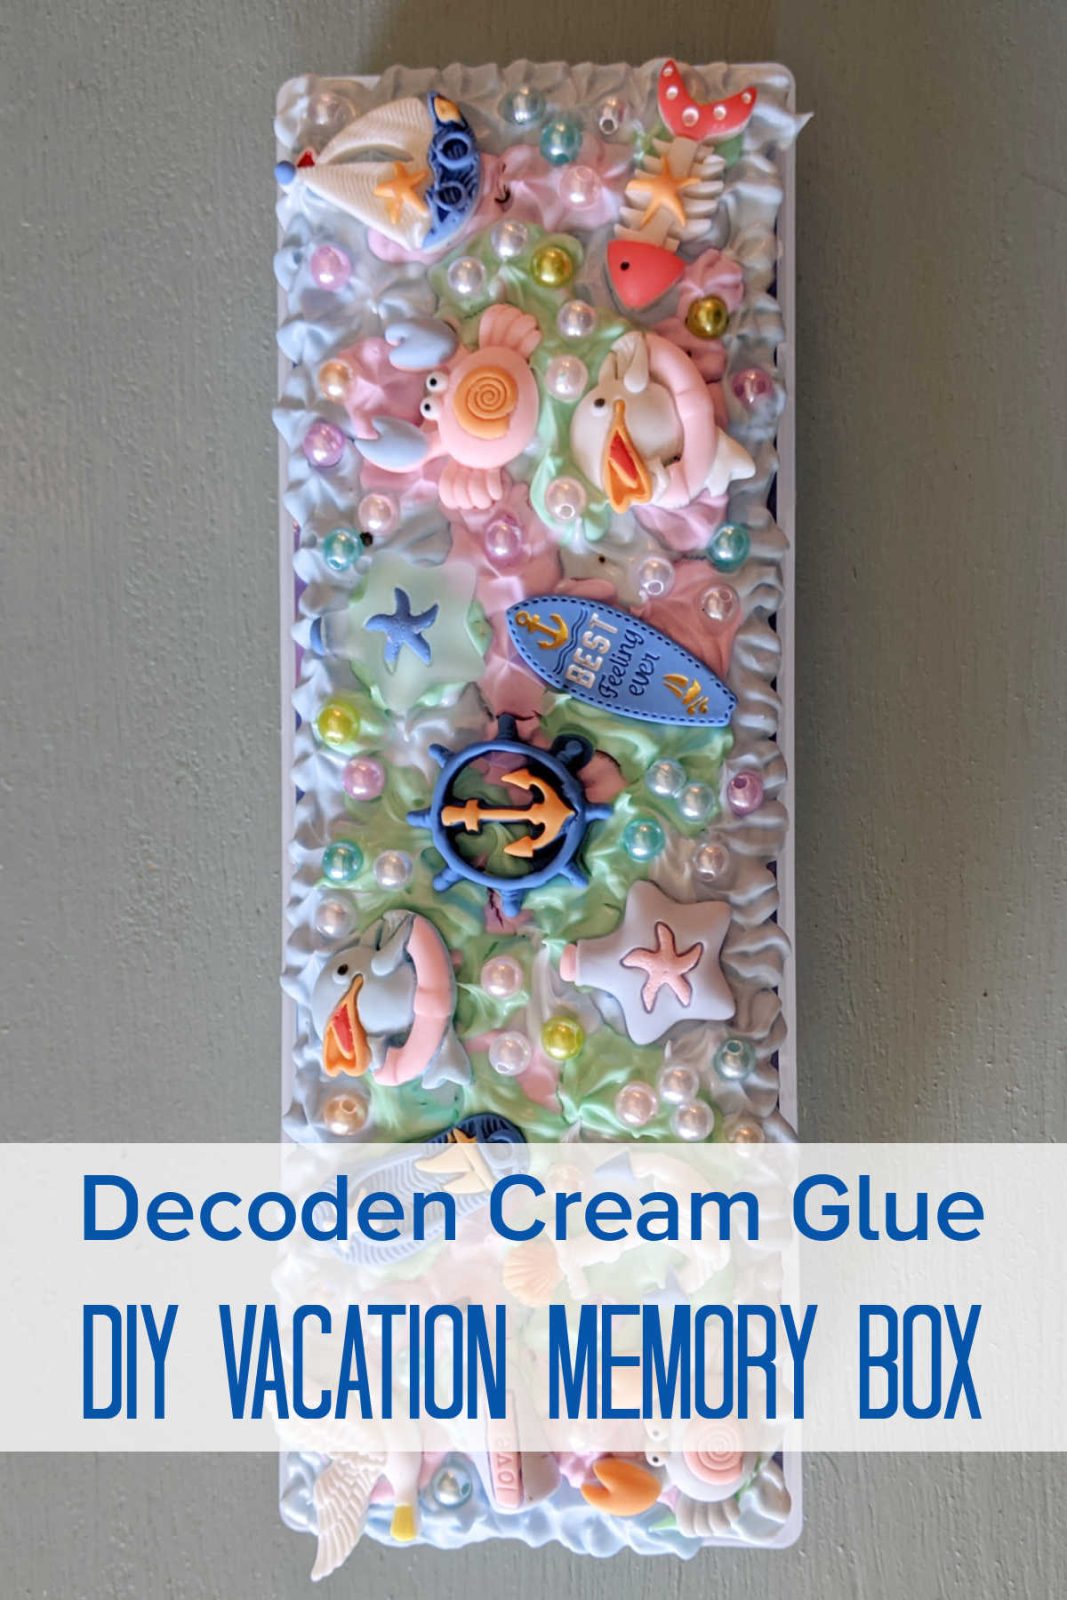 Craft a one-of-a-kind Vacation Memory Box with this easy and fun DIY project! Perfect for all ages, this craft uses whipped cream glue, charms & trinkets to create a beautiful box to hold your most treasured keepsakes. Great for beach trips, cruises, or any adventure!